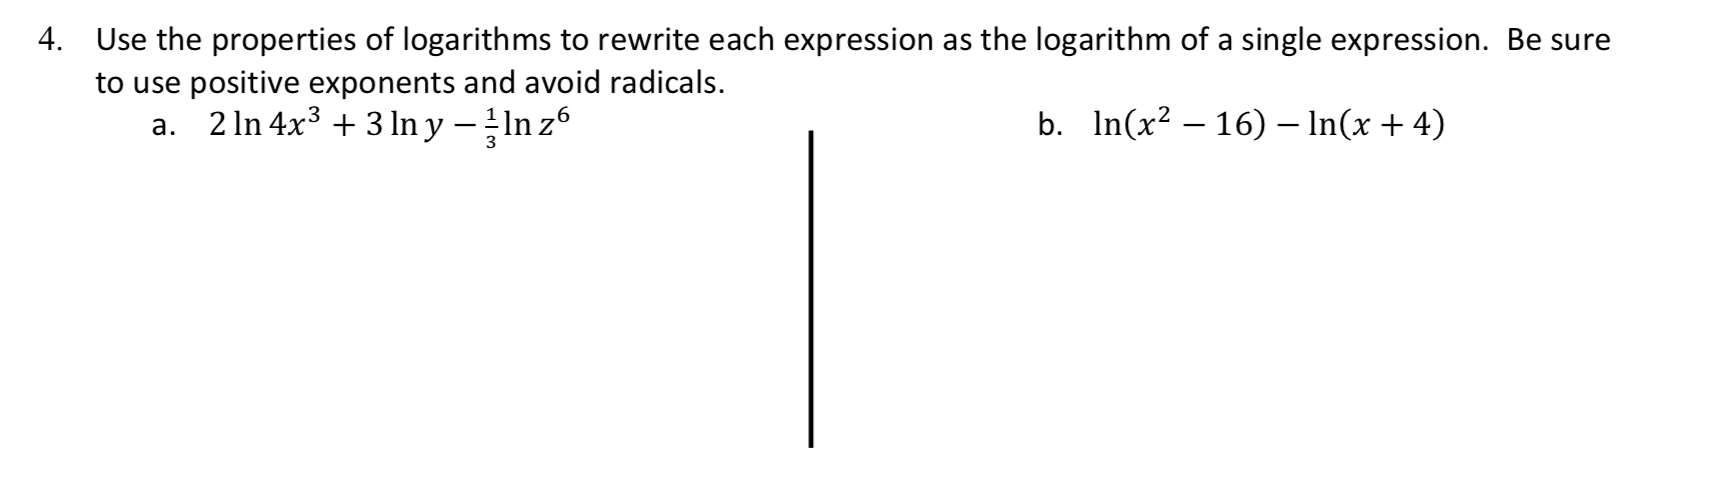 4.
Use the properties of logarith ms to rewrite each expression as the logarithm of a single expression. Be sure
to use positive exponents and avoid radicals
2 In 4x33 n y n z6
In(x2 16) - In(x 4)
b.
а.
